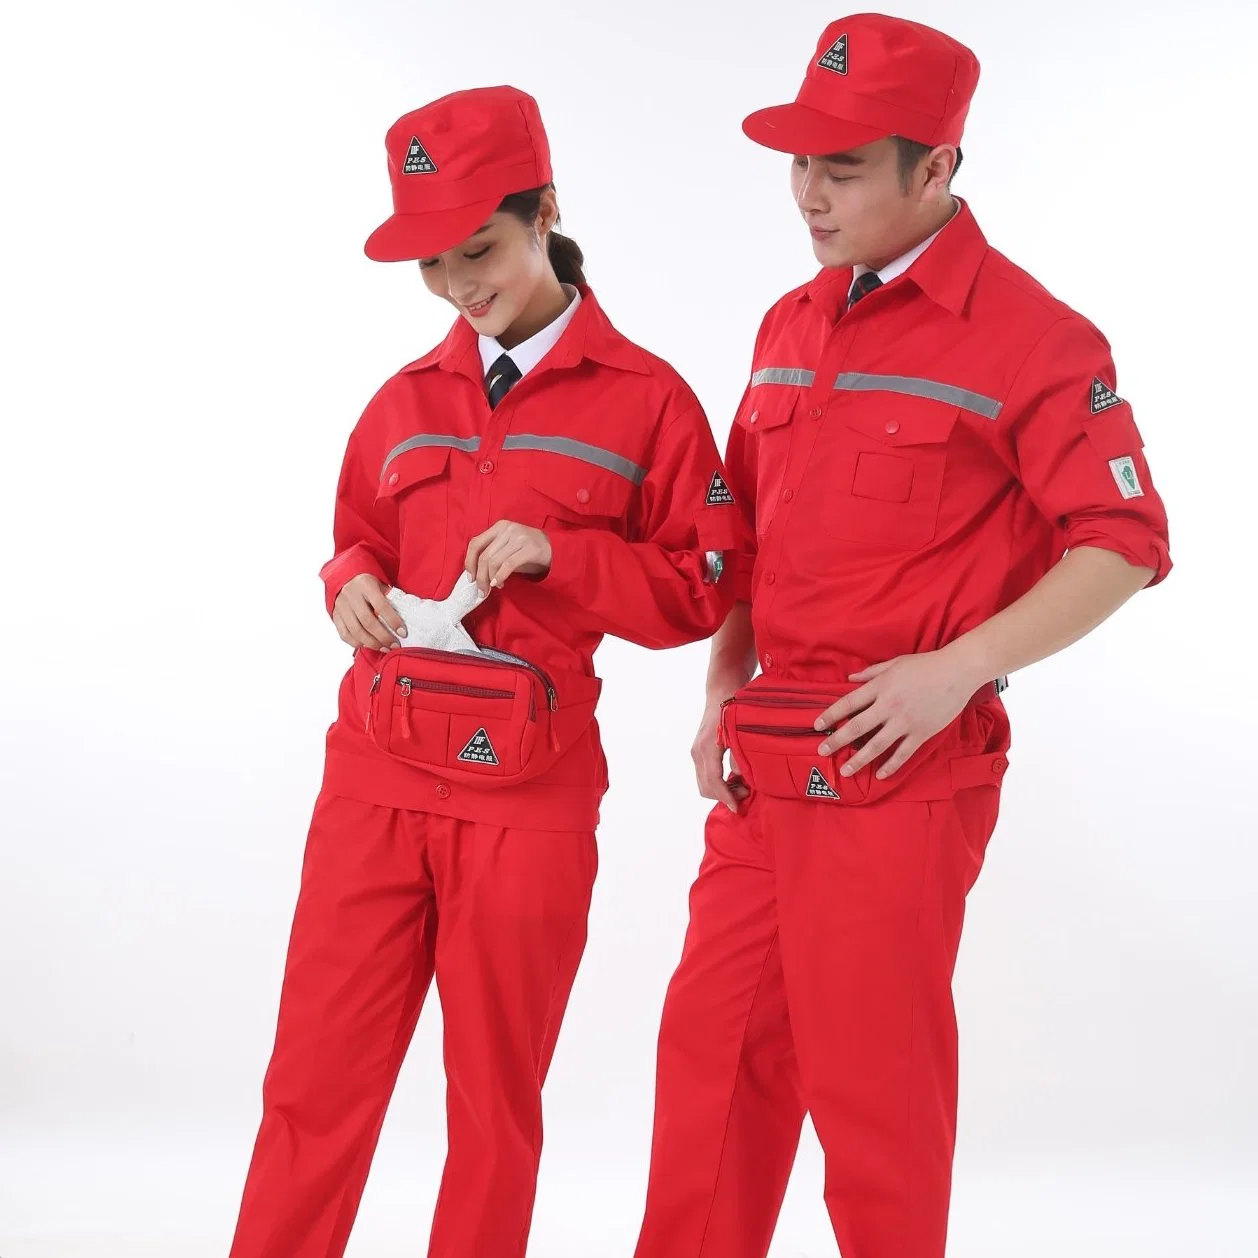 Miner Suit Factory Anti Static Clothing Work Shirt Suit Workwear with Hat